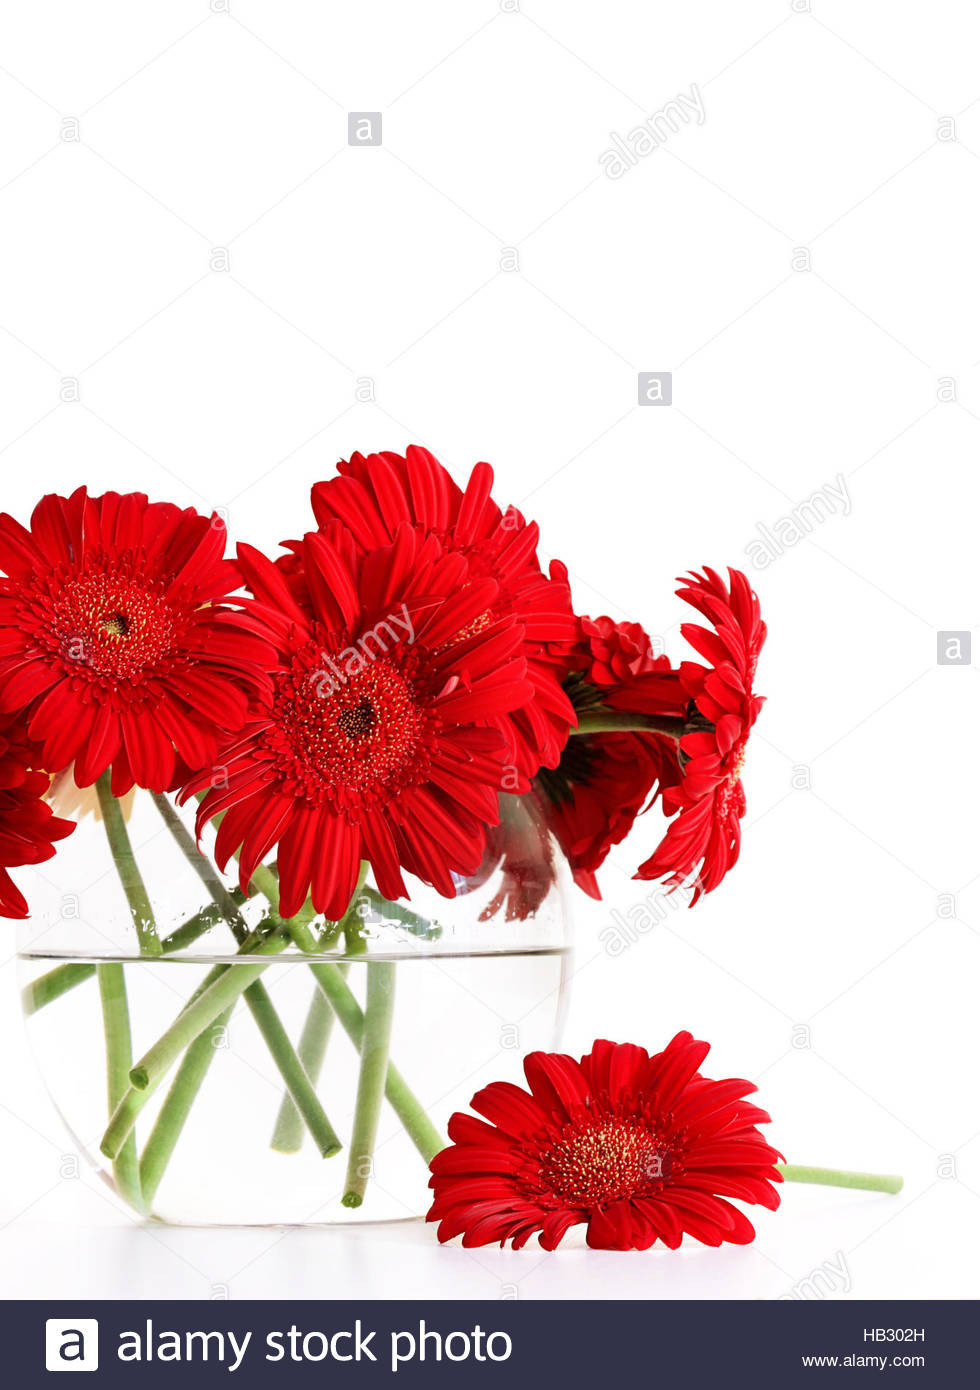 20 attractive Cracked Glass Vases wholesale 2023 free download cracked glass vases wholesale of vases artificial plants collection regarding red glass vase pics closeup od red gerber daisies in glass vase stock of red glass vase